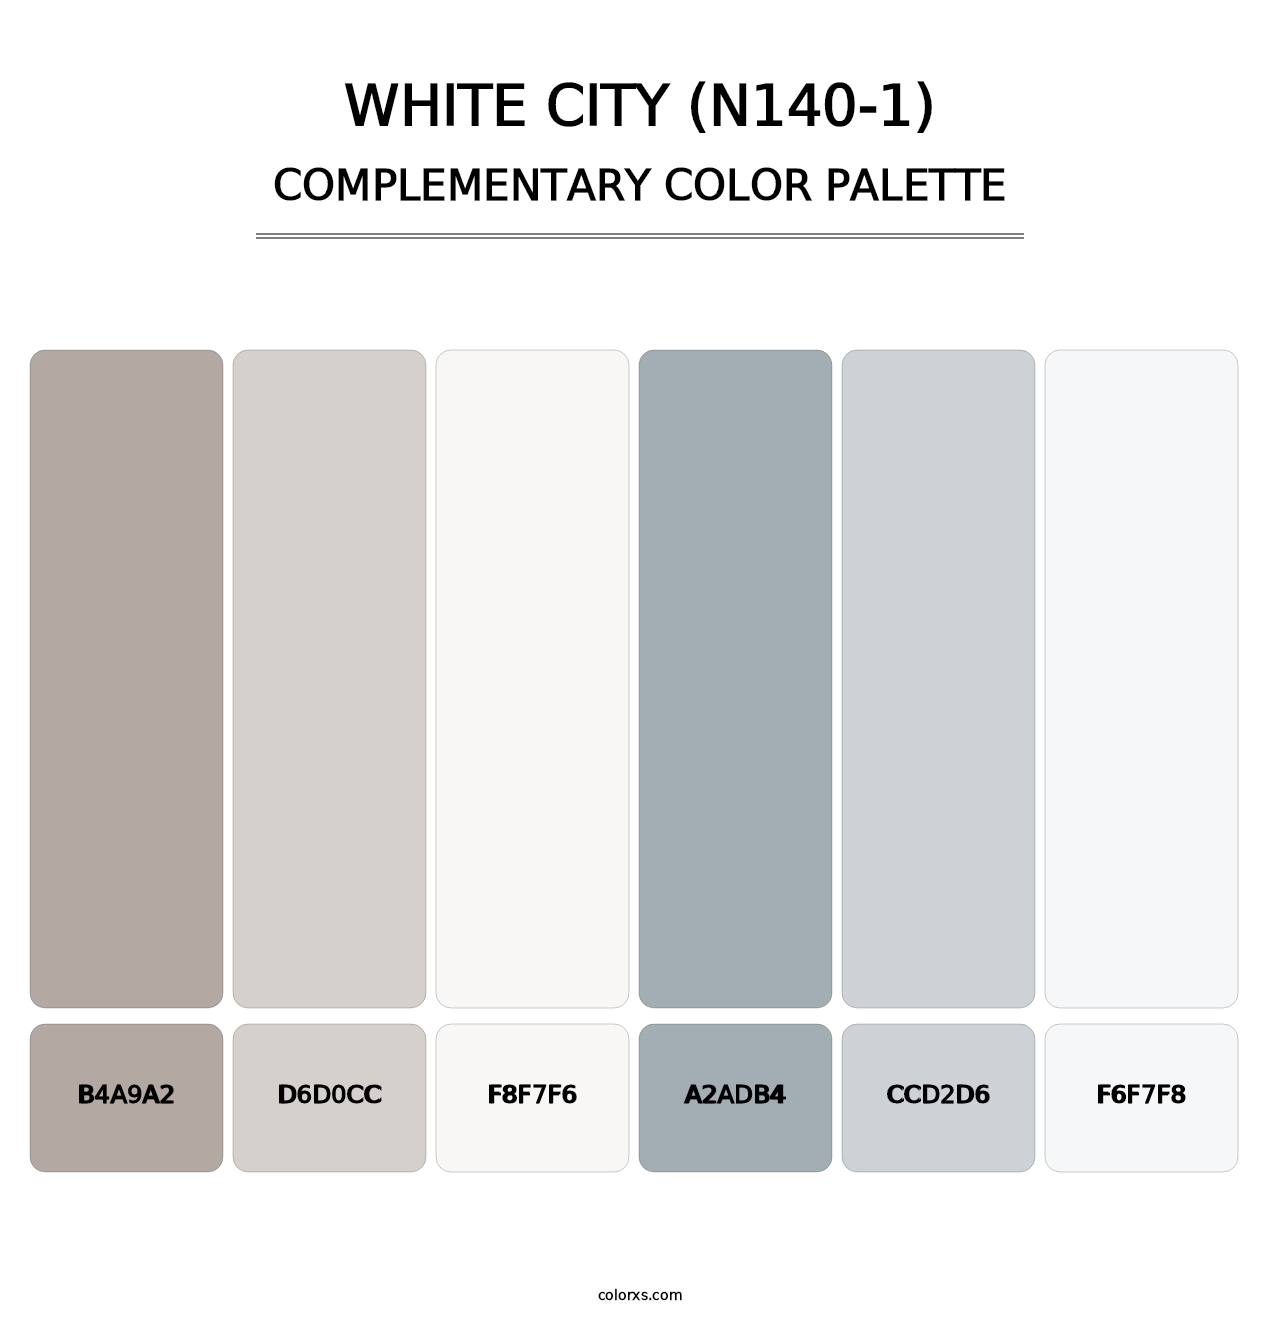 White City (N140-1) - Complementary Color Palette